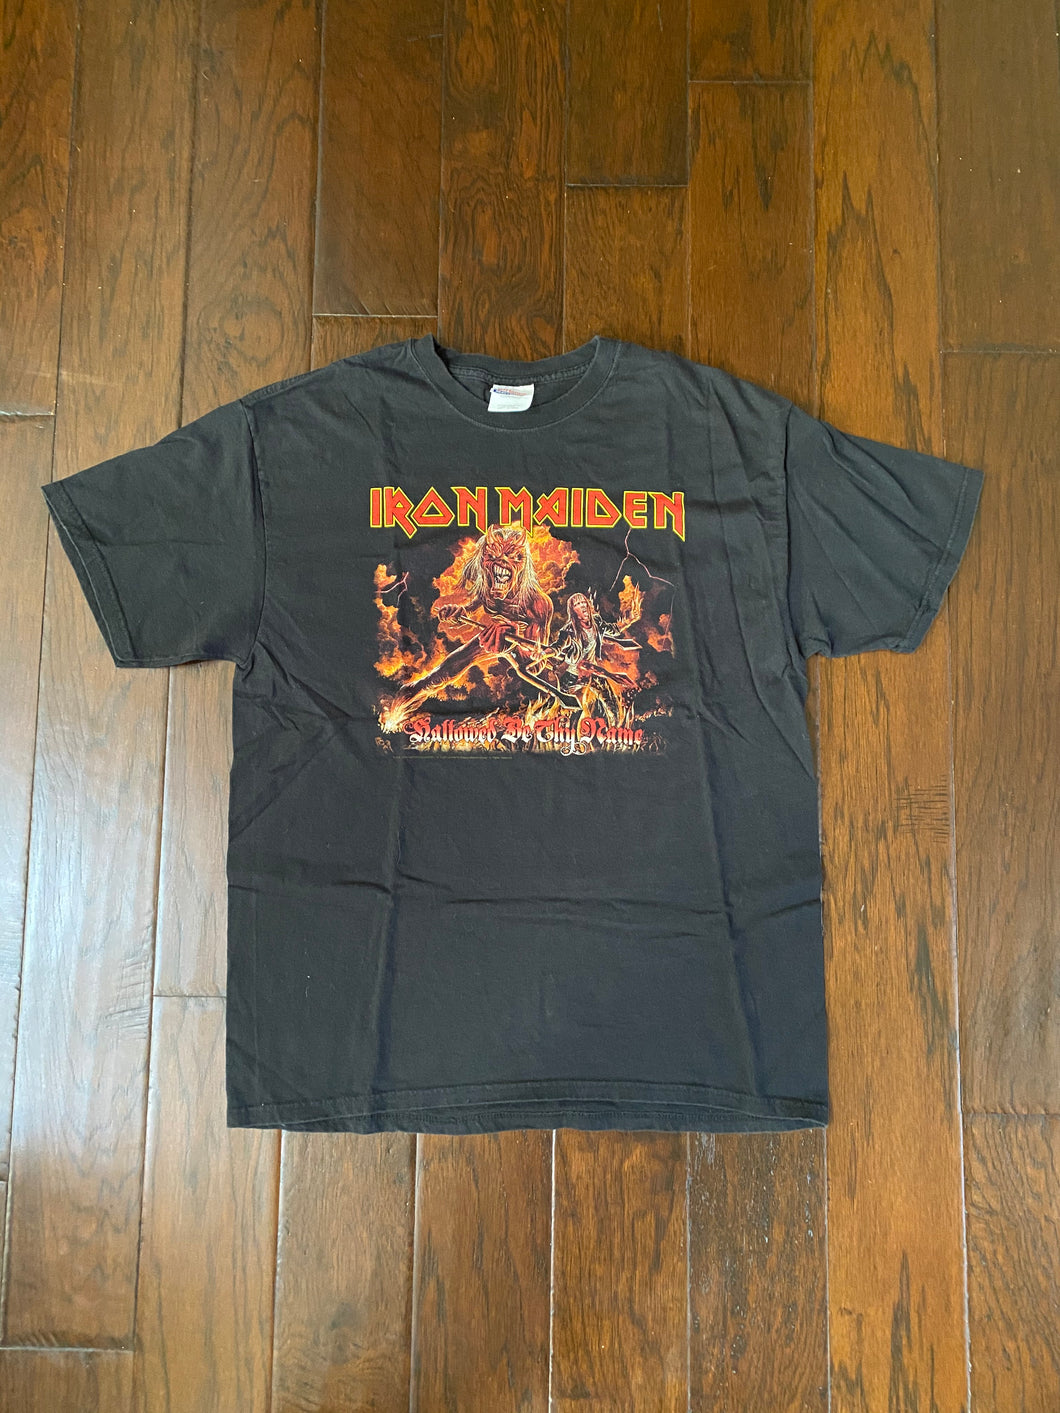 Iron Maiden 2005 “Hallowed Be Thy Name” Vintage Distressed T-shirt